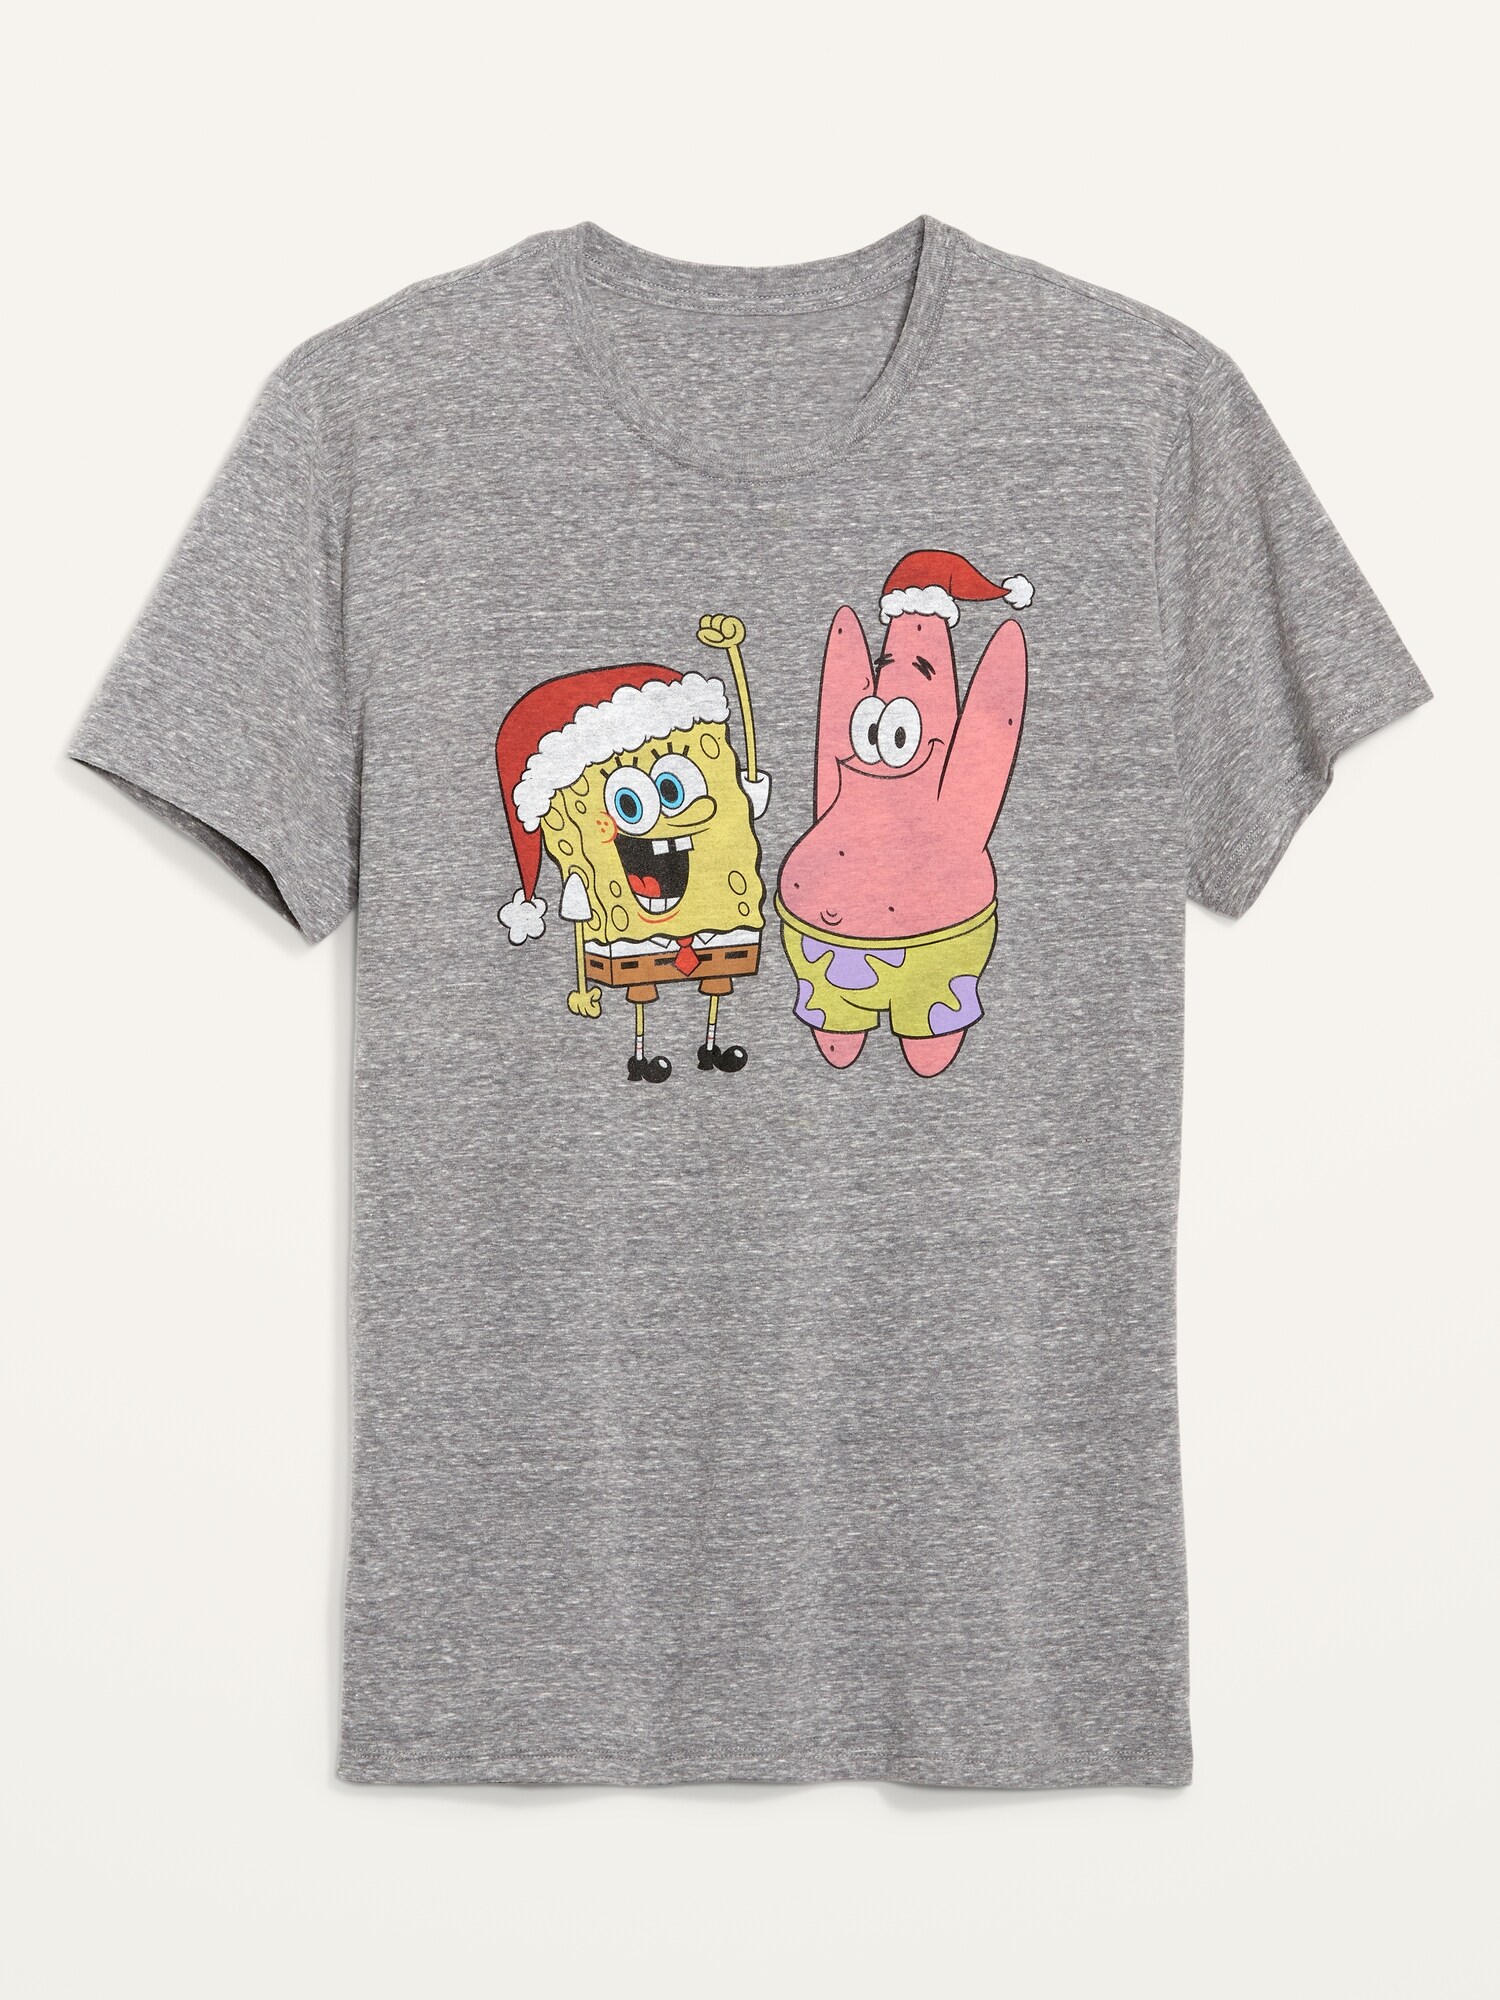 Spongebob Squarepants™ Christmas Gender Neutral Graphic T Shirt For Adults Old Navy 9801